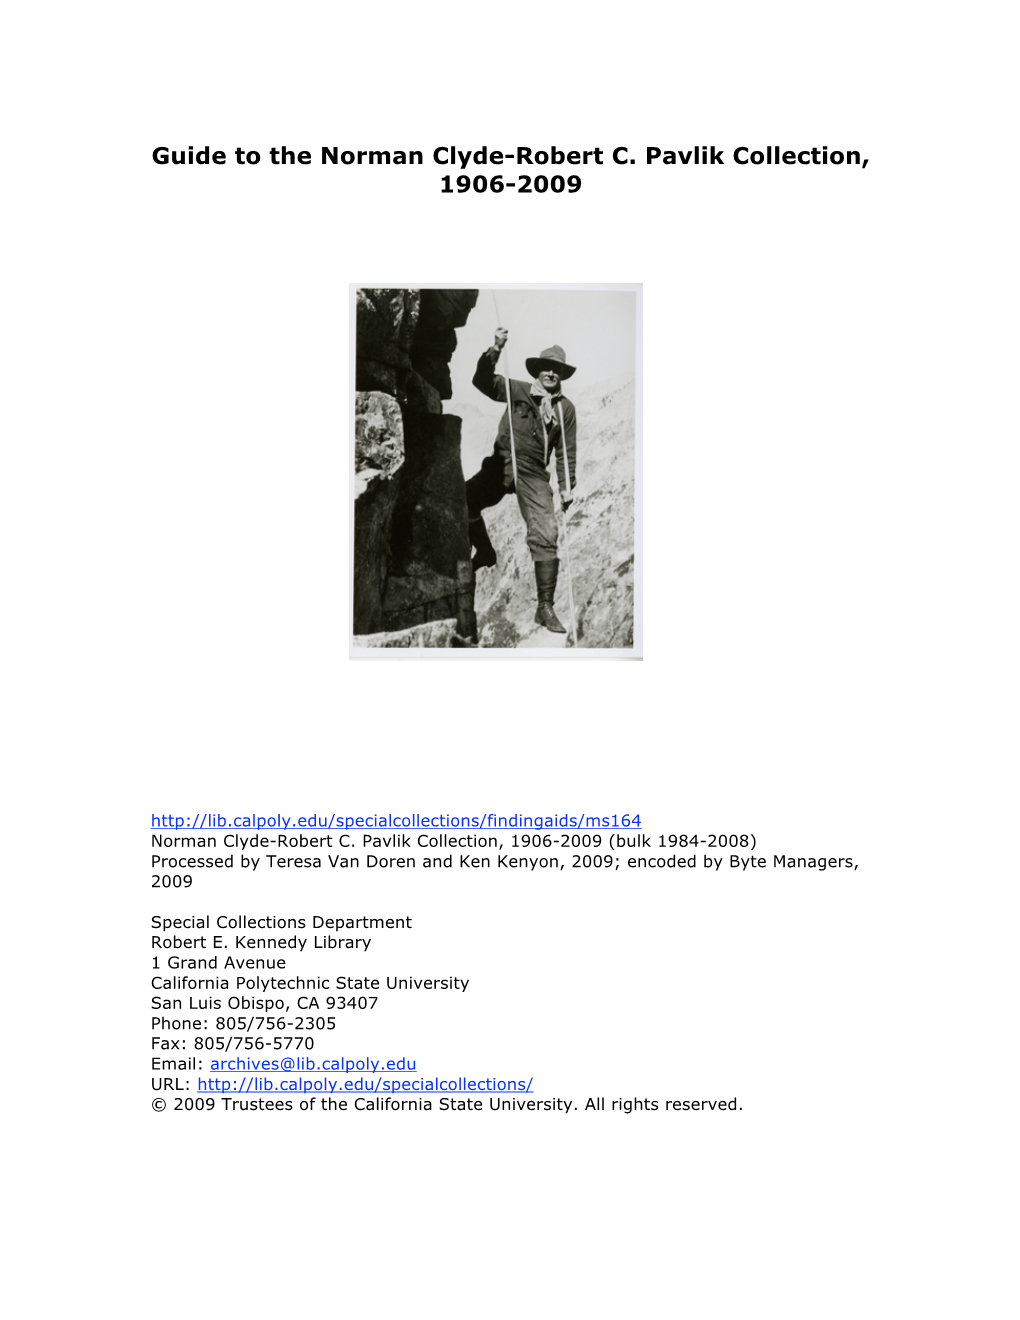 Guide to the Norman Clyde-Robert C. Pavlik Collection, 1906-2009